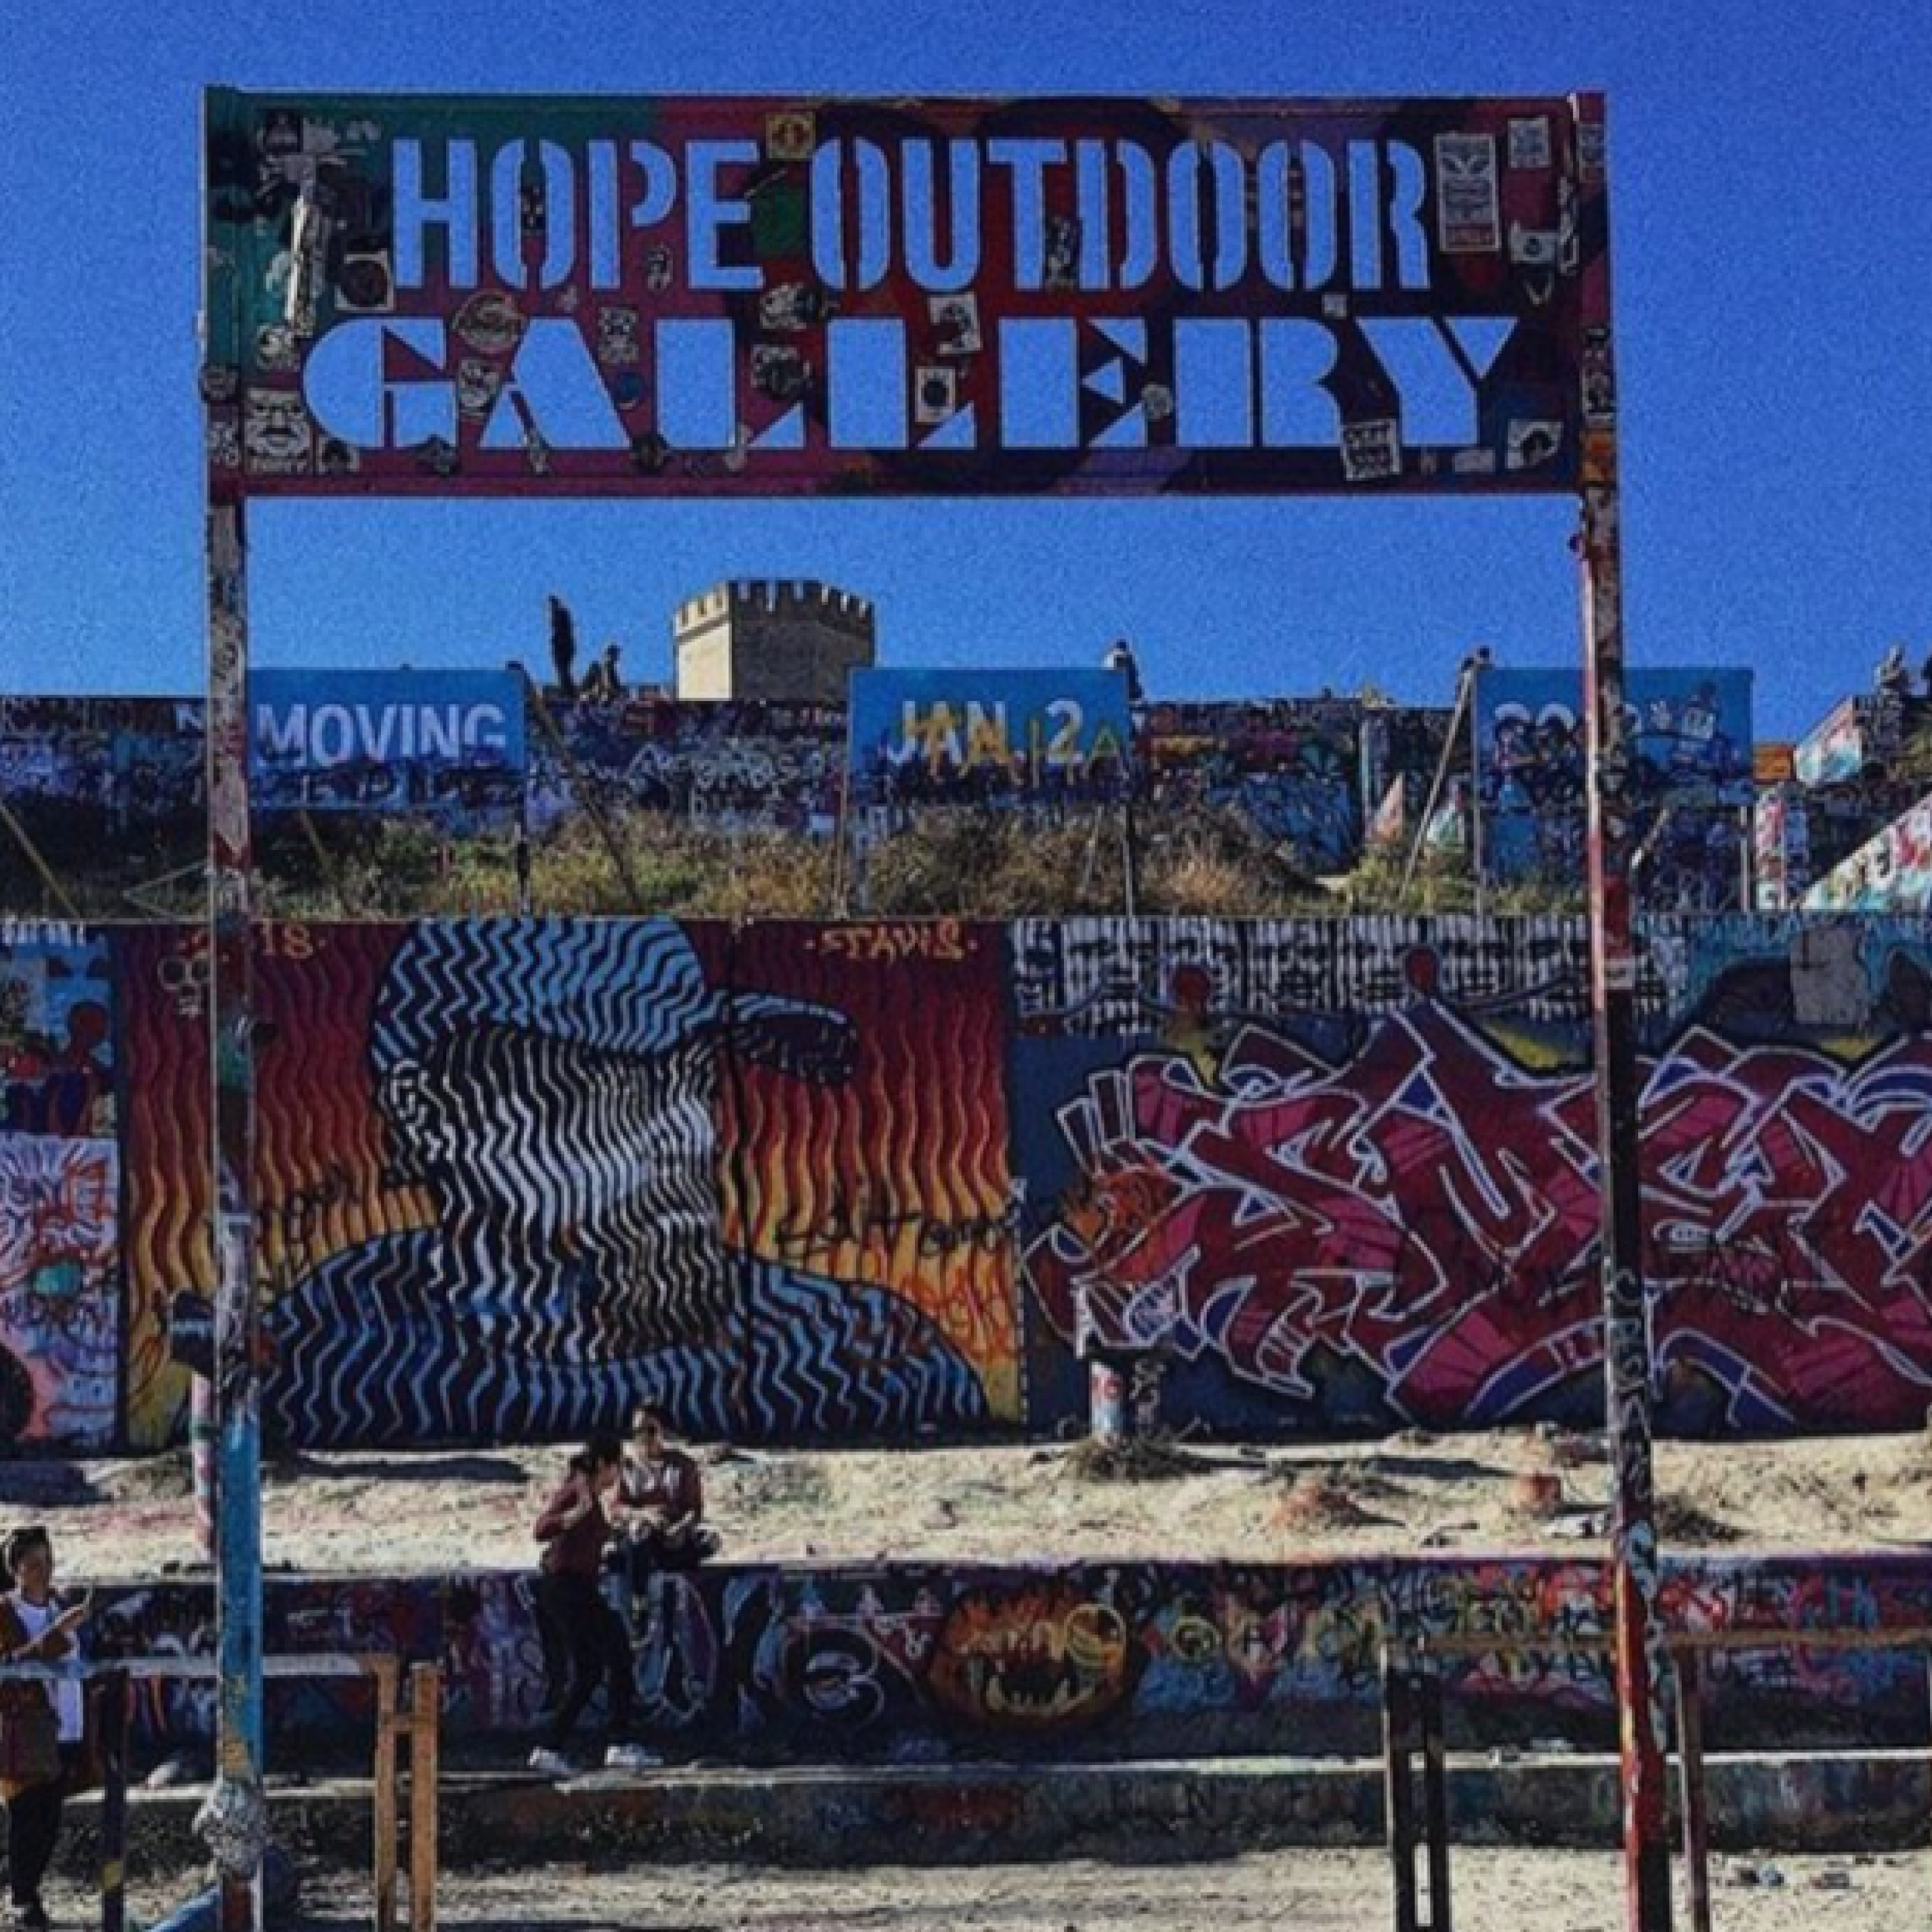 HOPE Outdoor Gallery 第 1 号地の壁面アート 